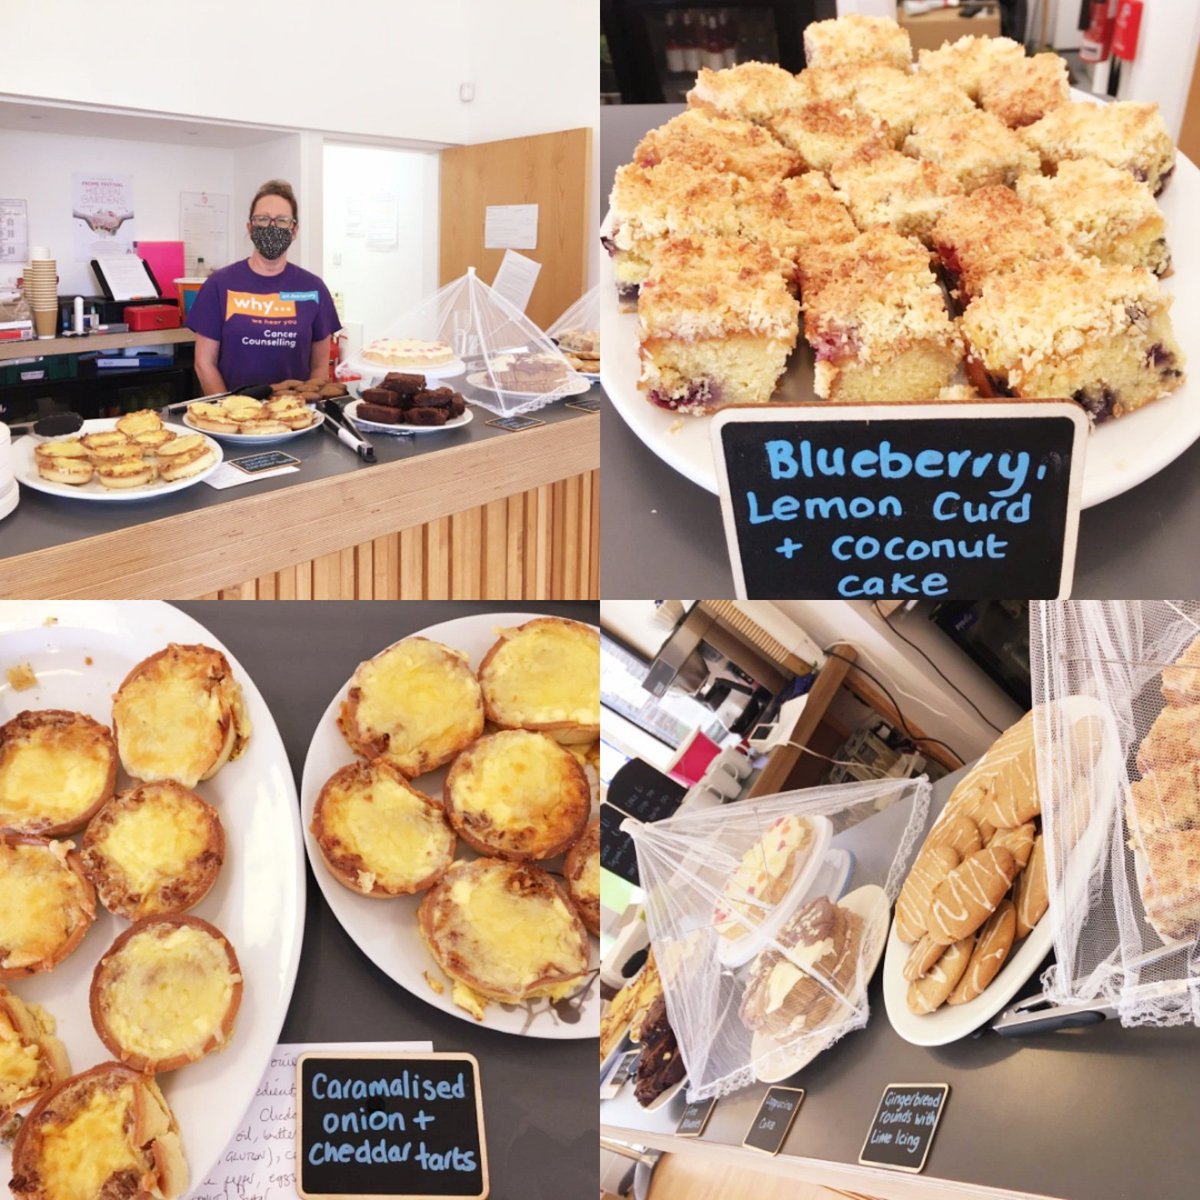 If checking out the @Frome_Festival exhibition AND supporting a local charity isn't enough reason to head down (or up) to @RookLaneFrome today, we reckon this smorgasbord of deliciousness will convince you! 10 till 4 today and every day till 12th July pic.twitter.com/0W5AJNxvAs